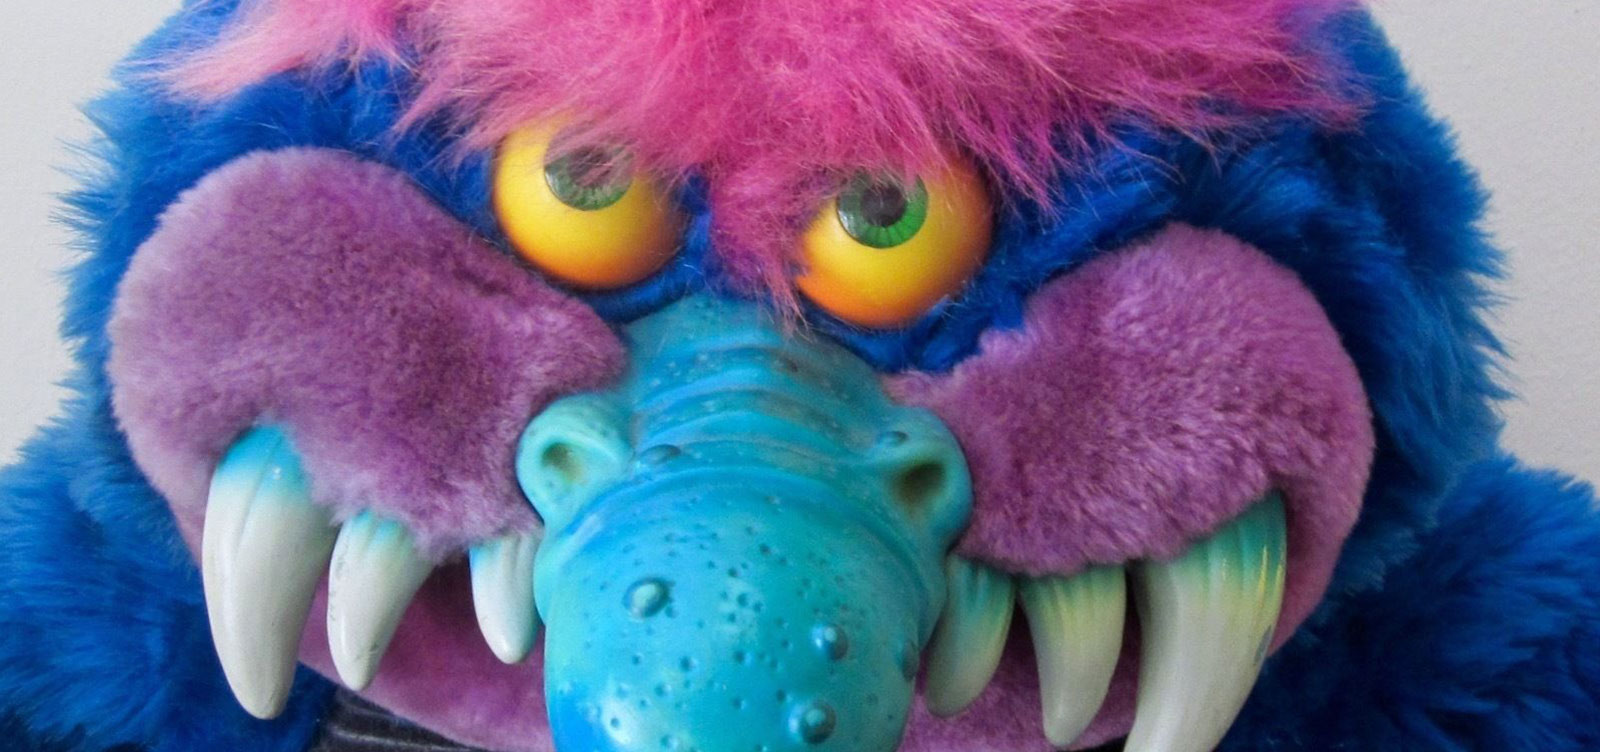 stuffed monster from the 80s